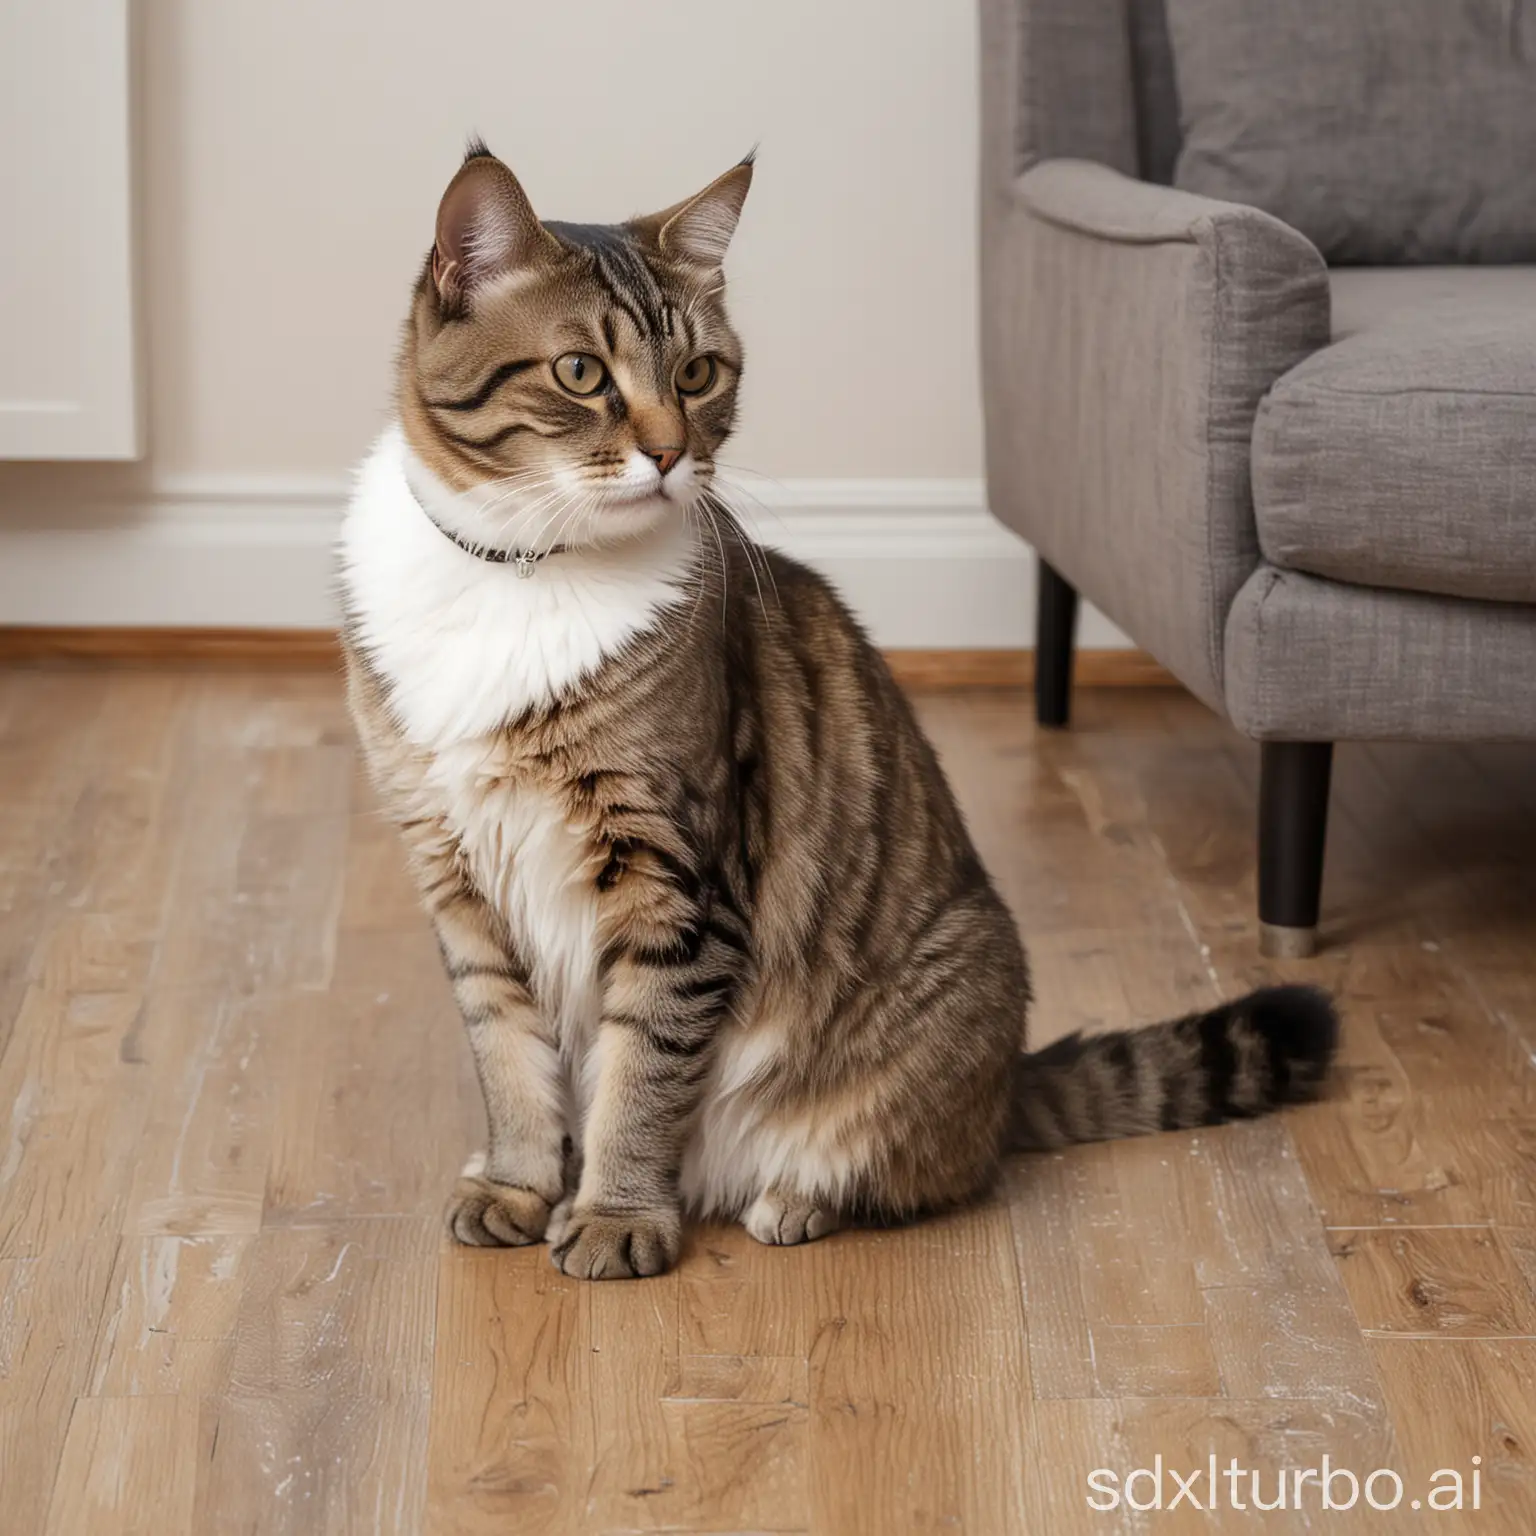 A eight-month-old brindle Chinese domestic cat is squatting on the light-colored wooden floor of an apartment, with a light gray low sofa behind it. This cat only has white fur on its neck and legs.